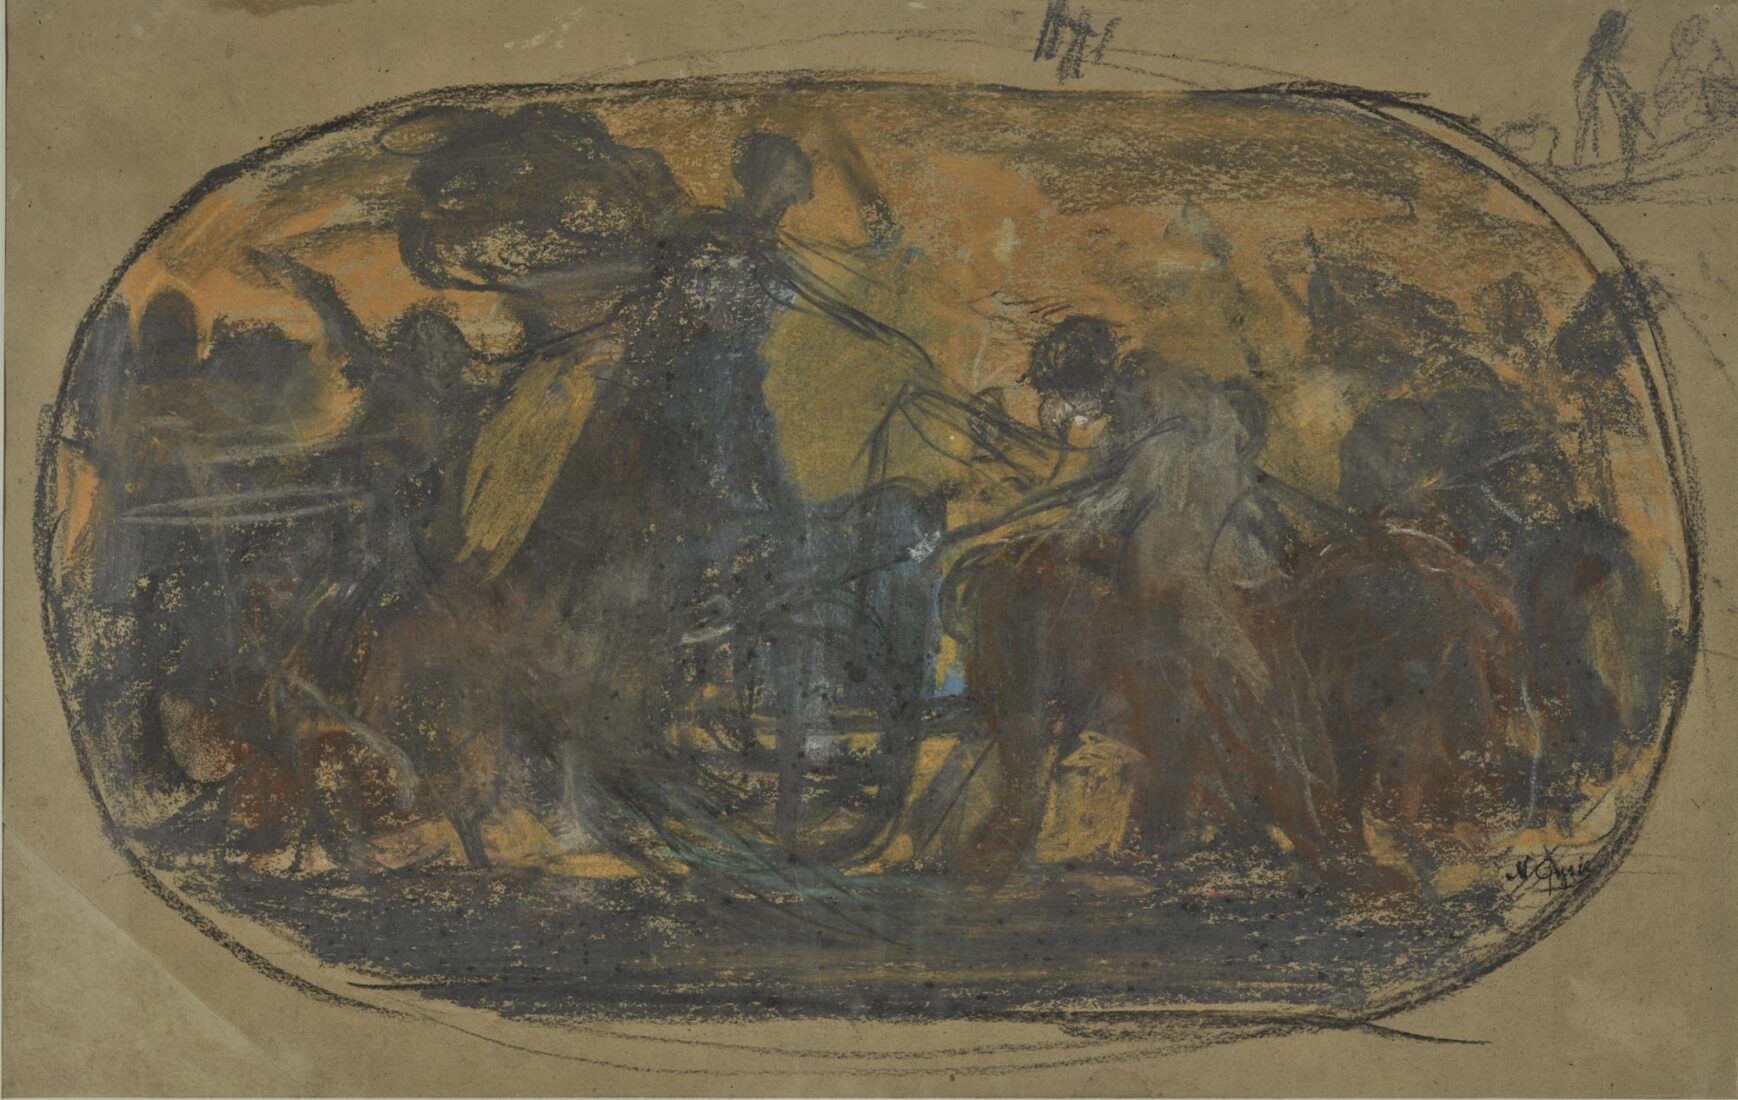 Study for the Ceiling Painting in the Auditorium of the Museum of Decorative Arts in Nuremberg - Gyzis Nikolaos